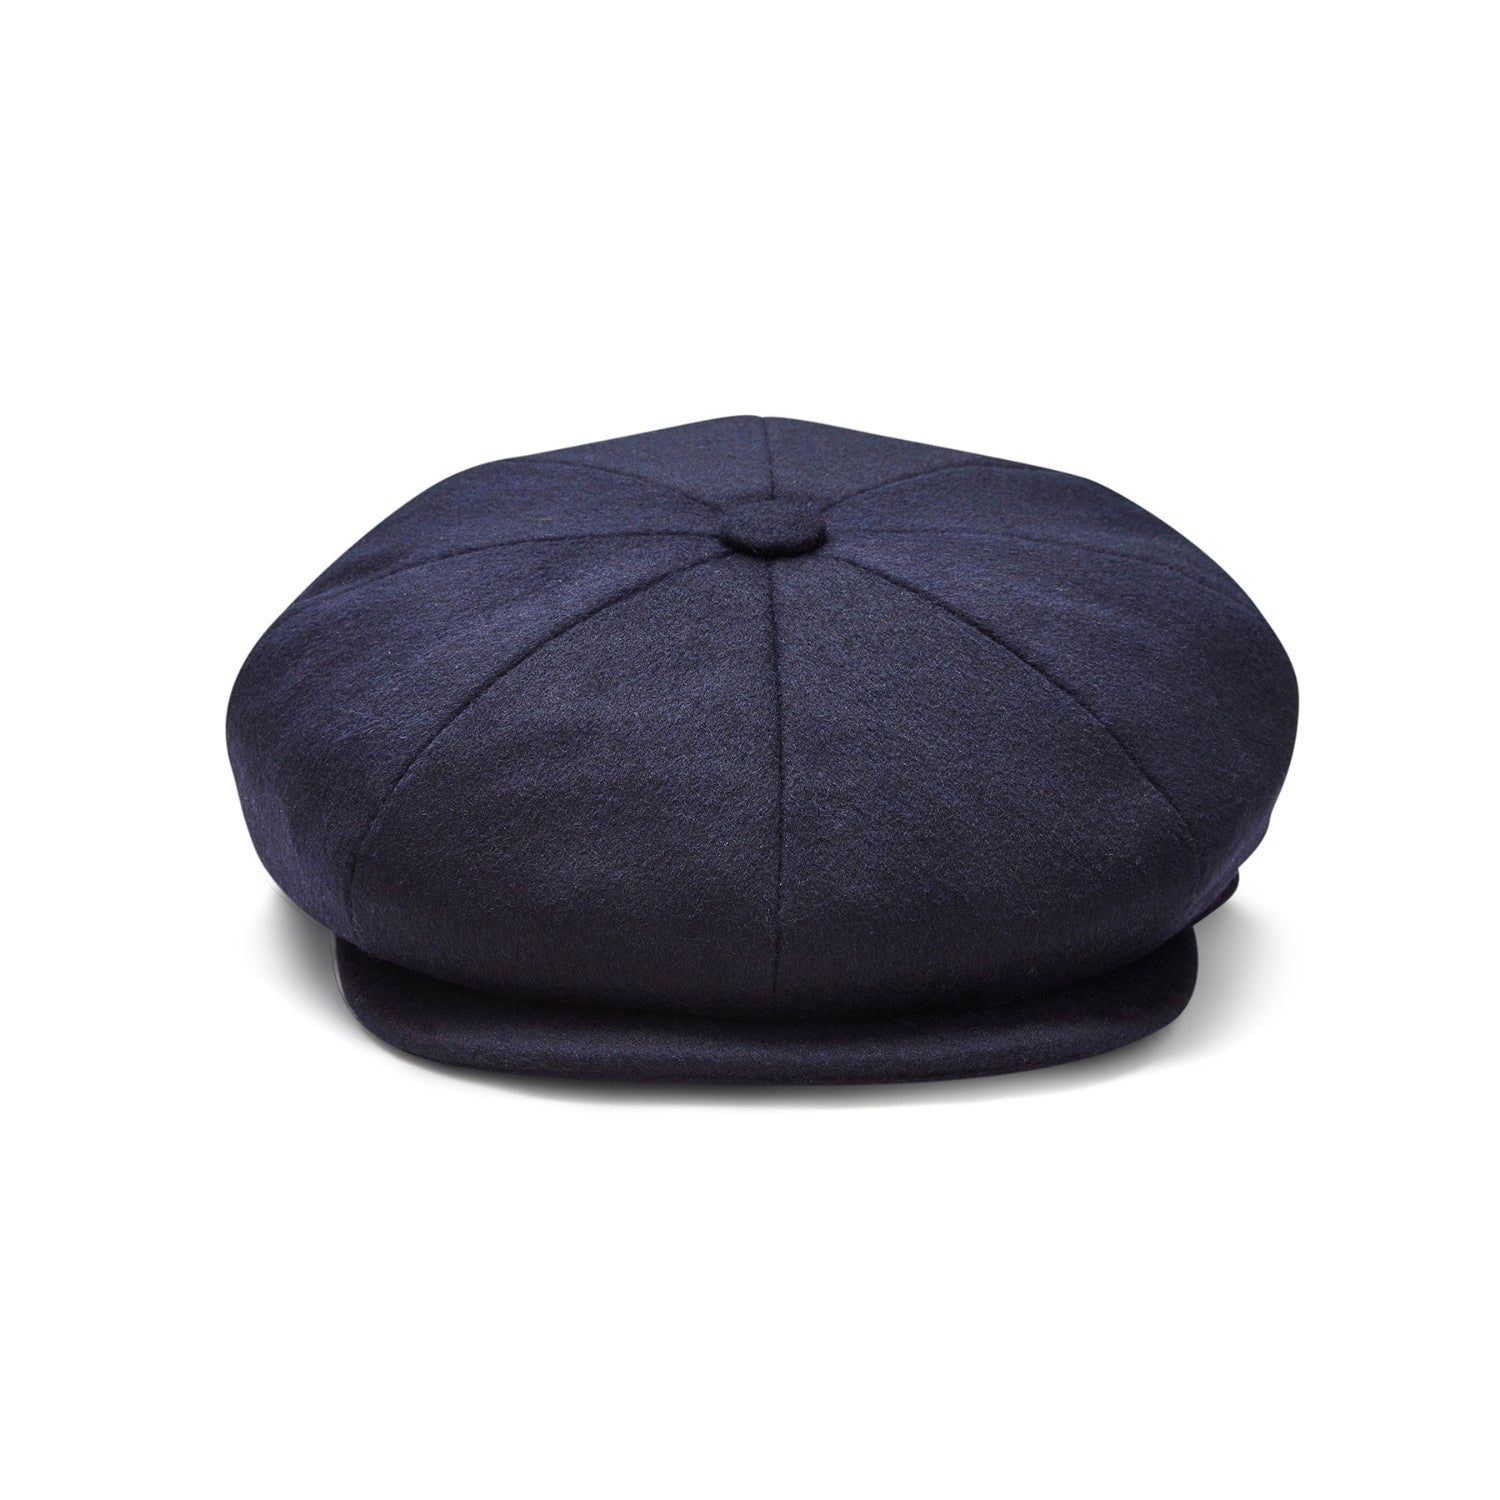 Blue Flat Cap Peaky Blinders | The Cashmere Choice